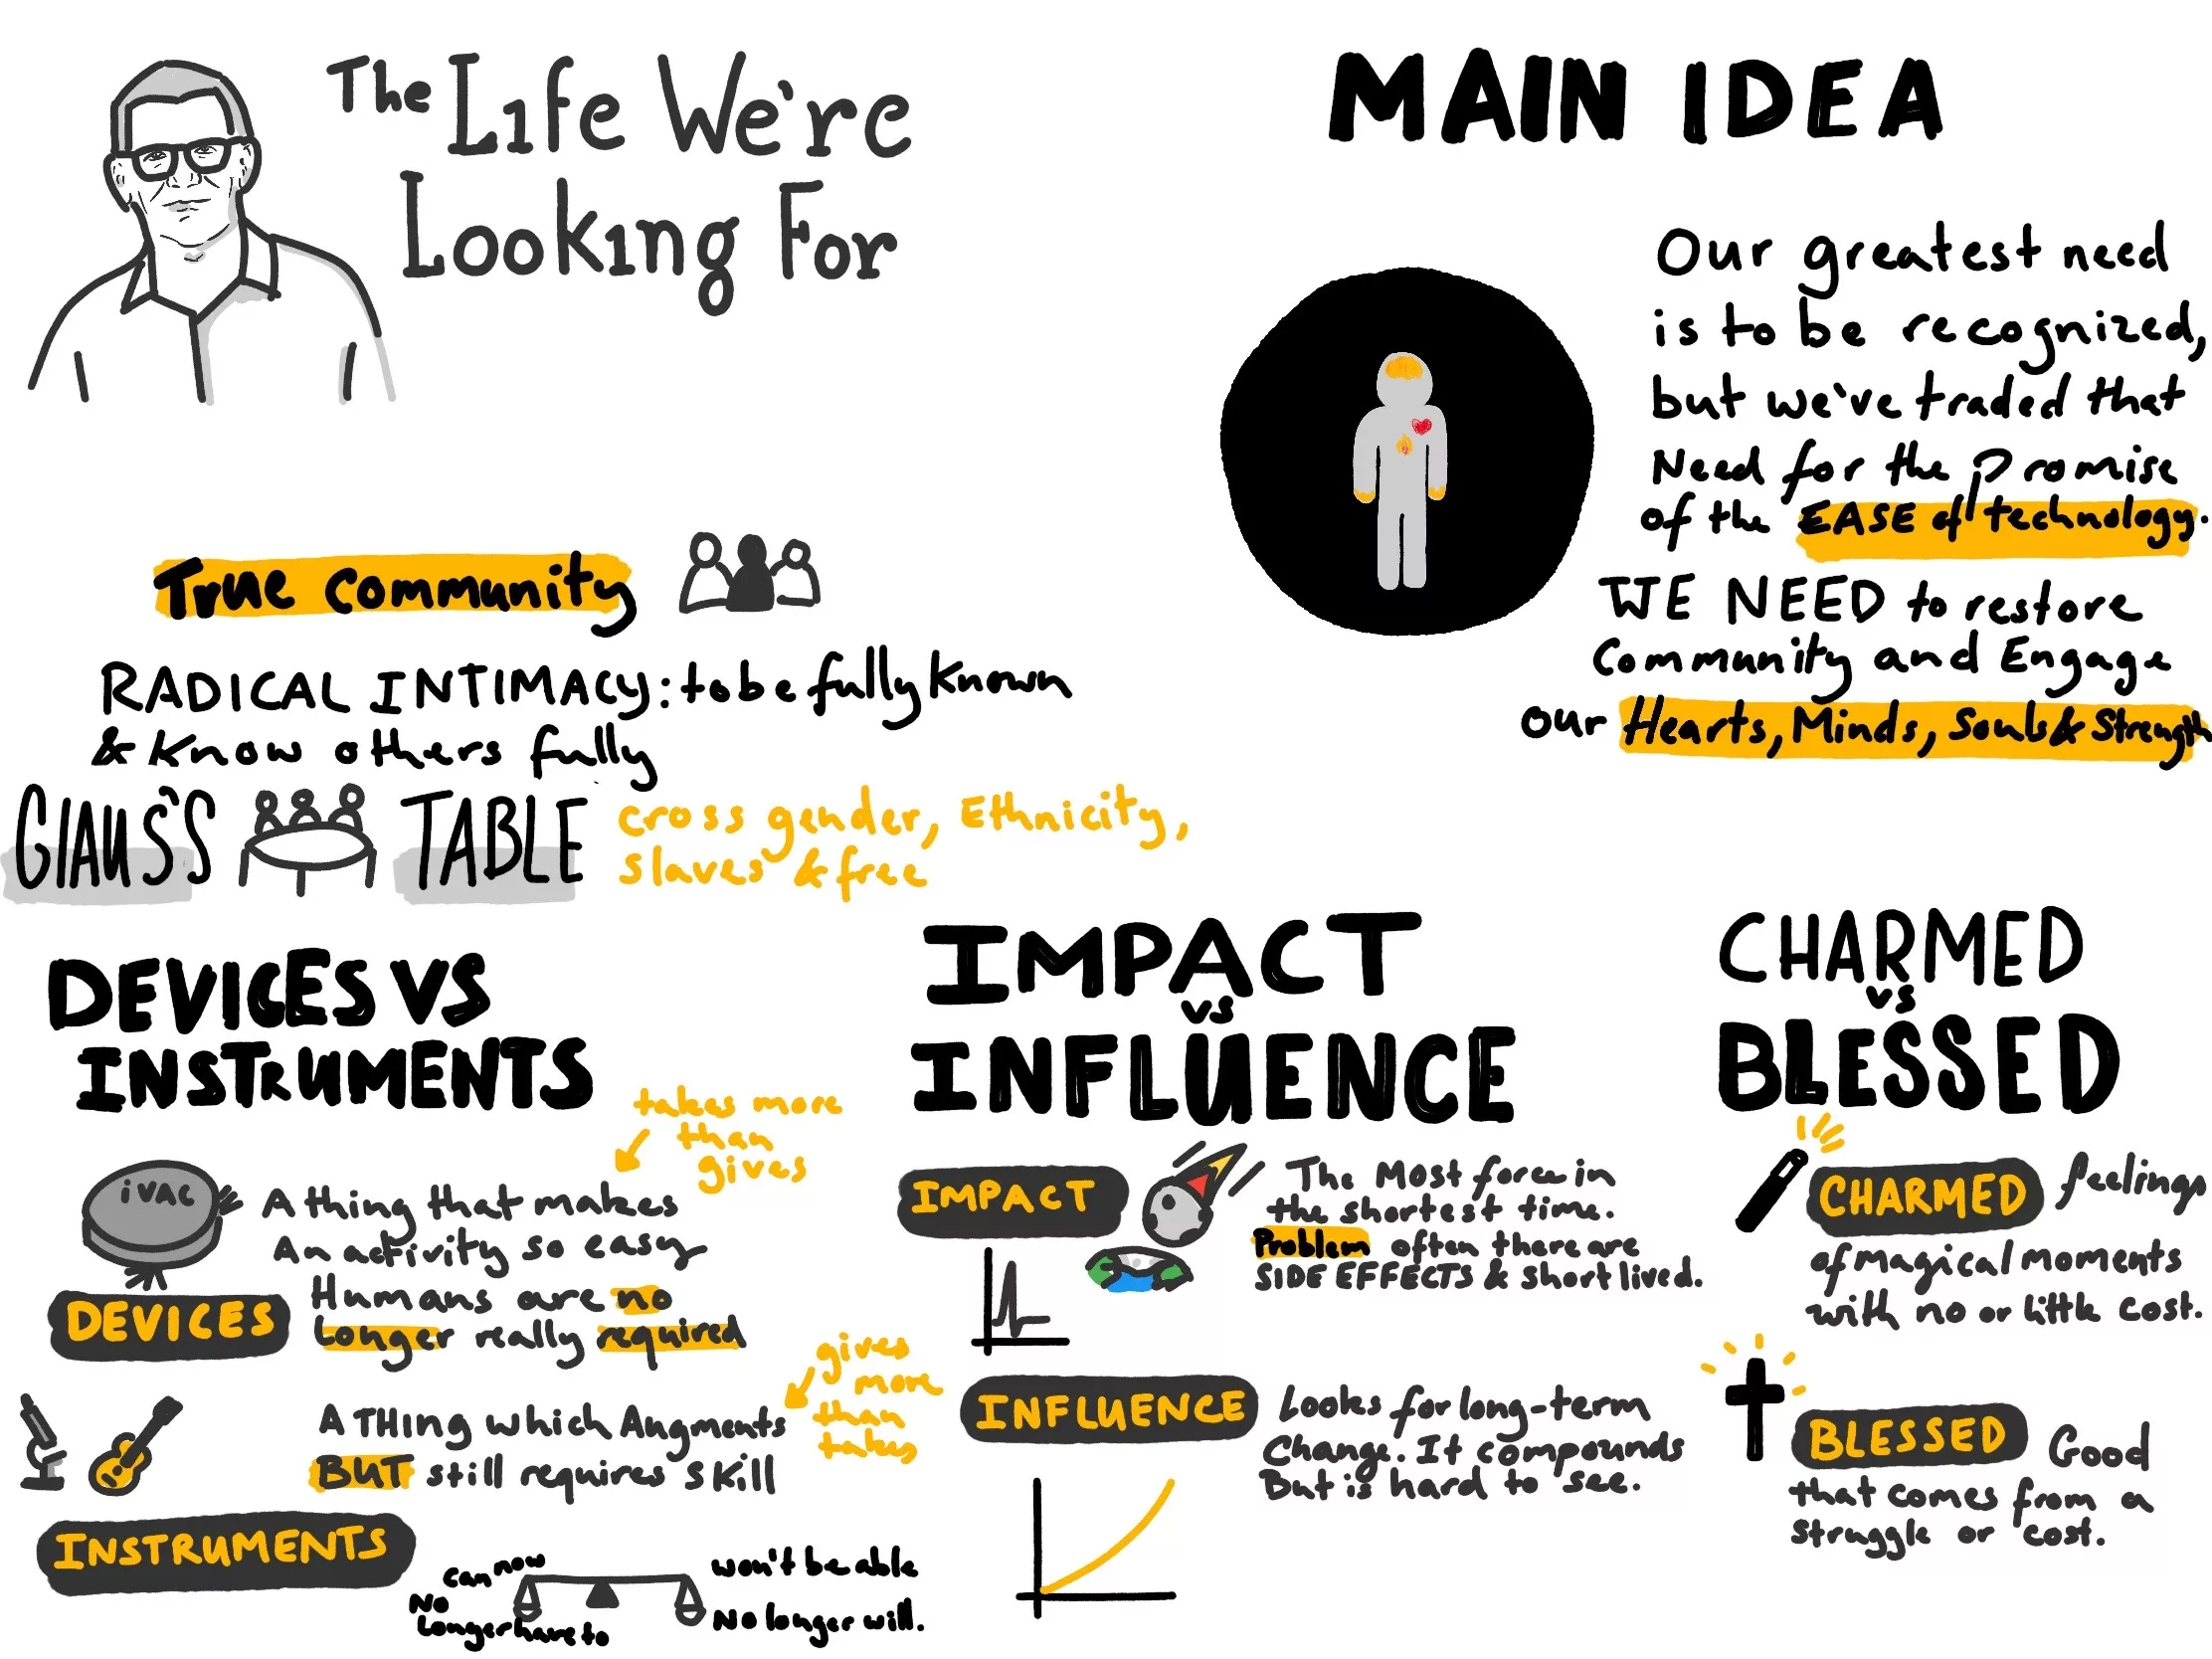 A sketchnote summary of the book The Life We're Looking For by Andy Crouch.